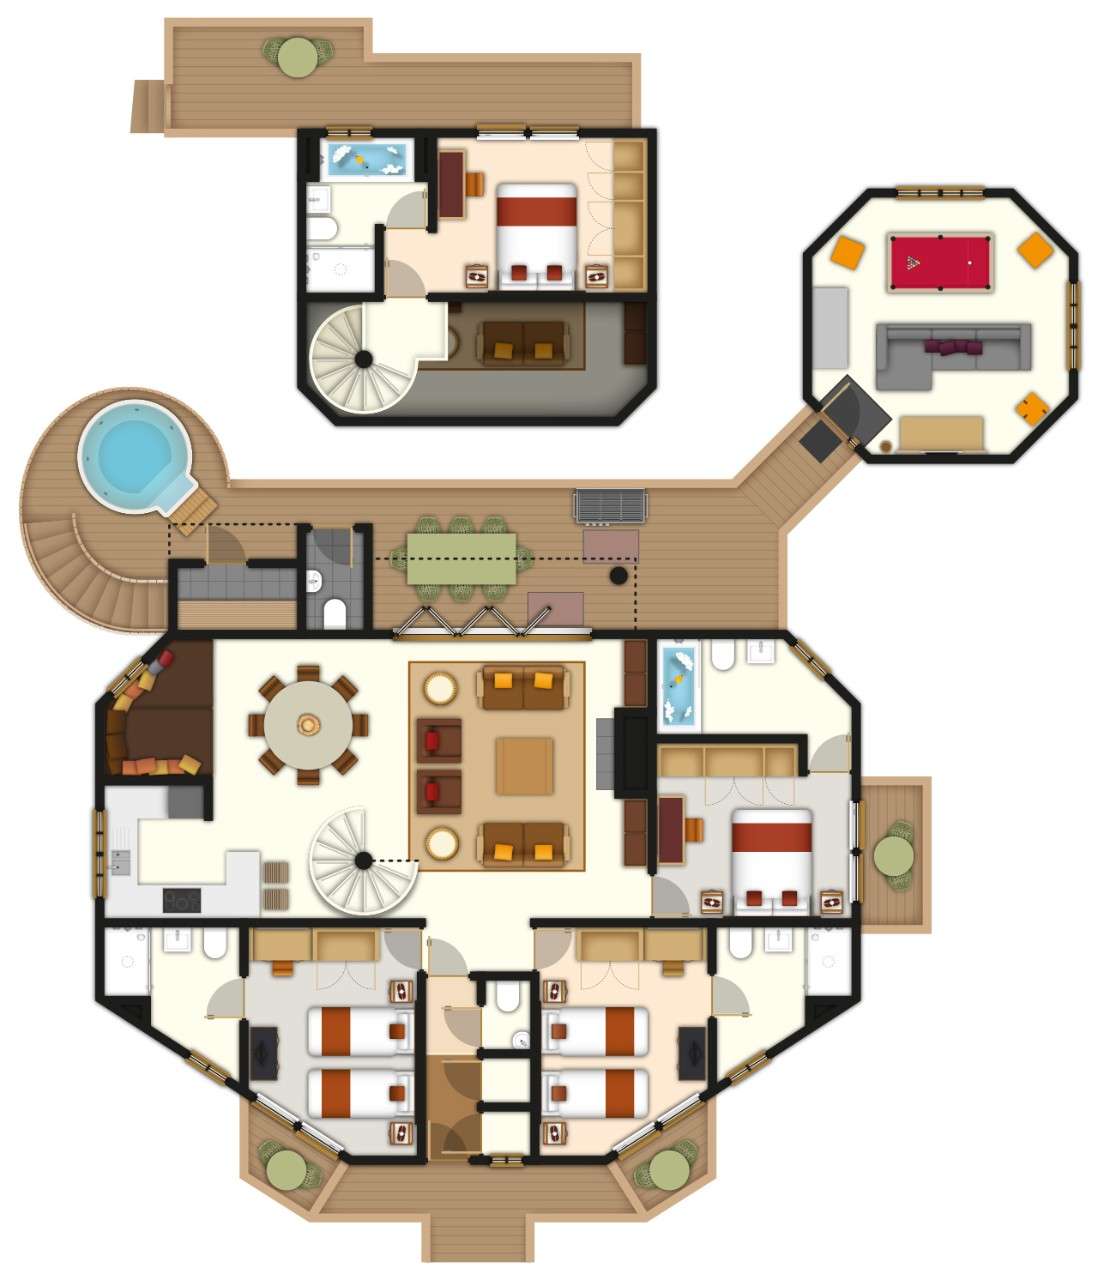 A detailed floor plan illustration of a Treehouse. If you require further assistance viewing the floor plan or need further information please contact Guest Services.